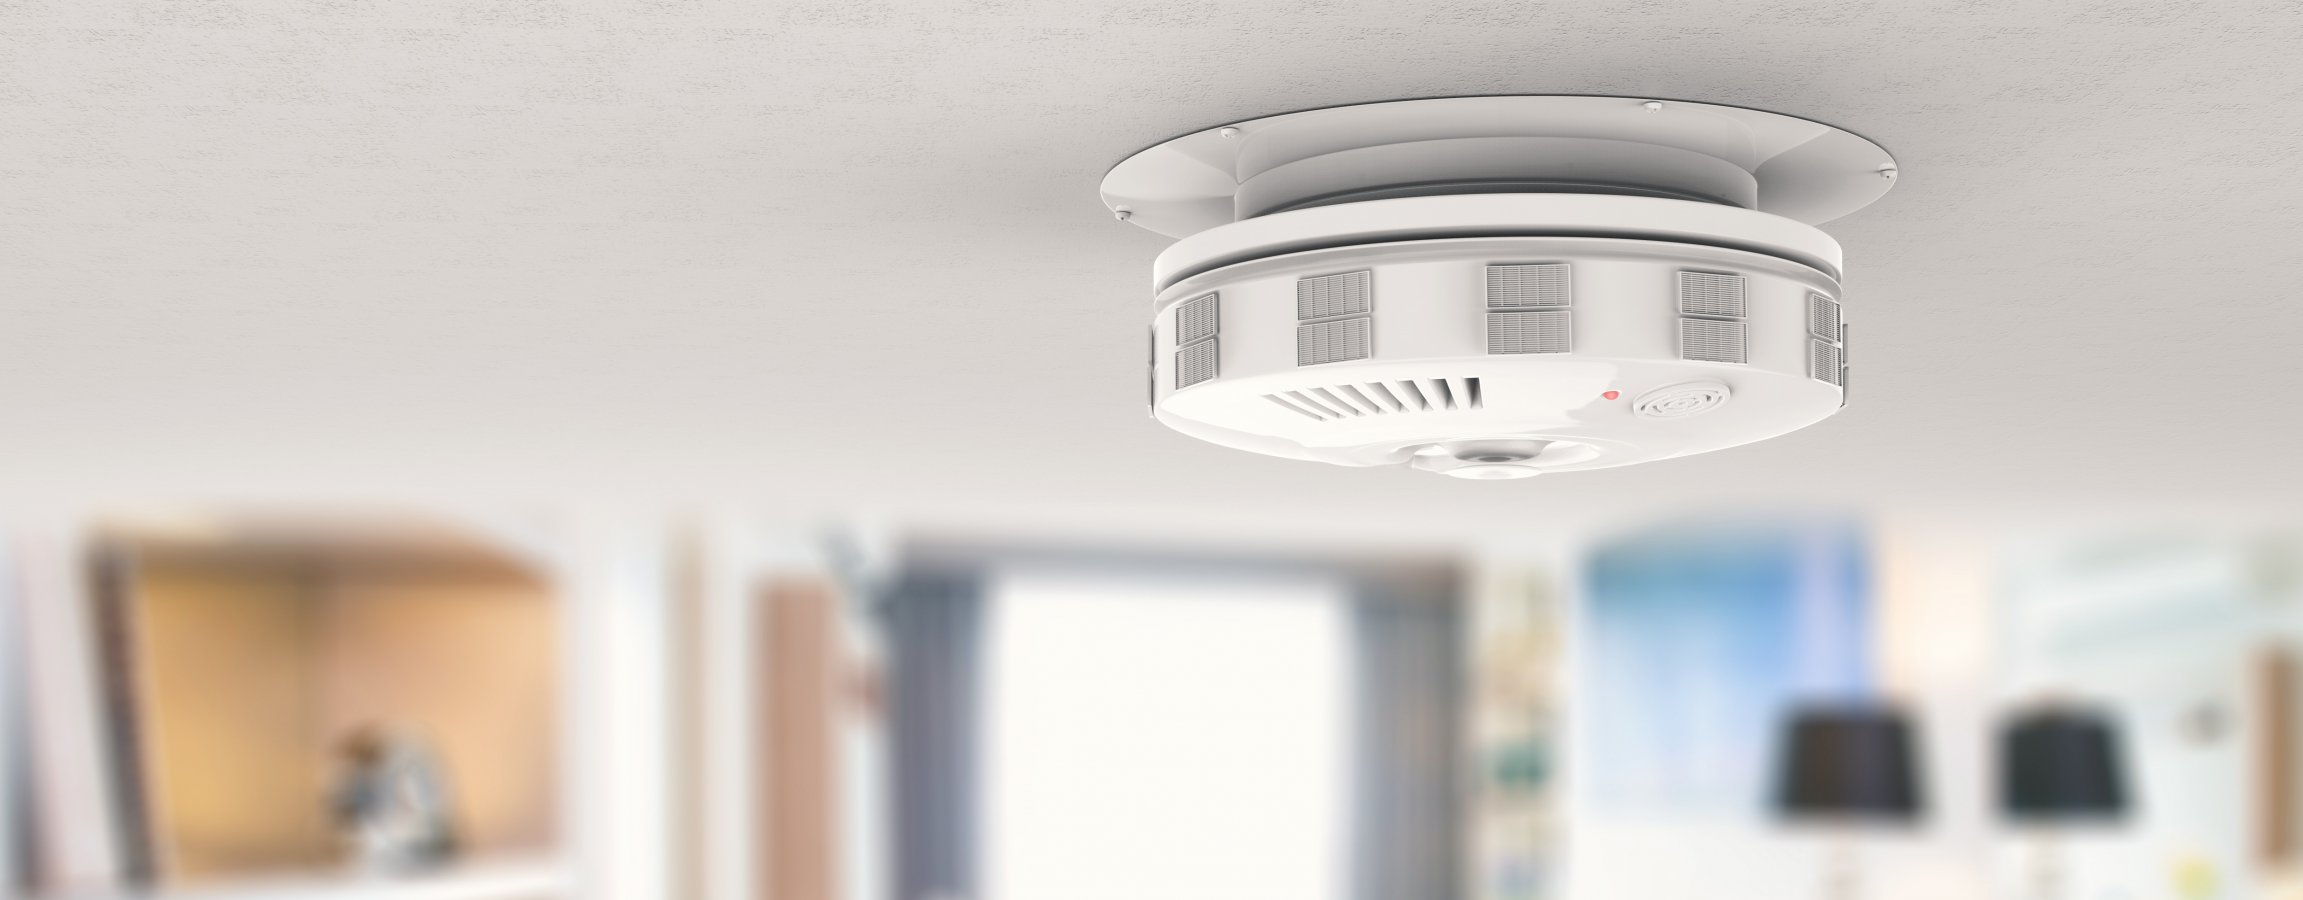 Smoke detectors: here’s what you need to know about the batteries